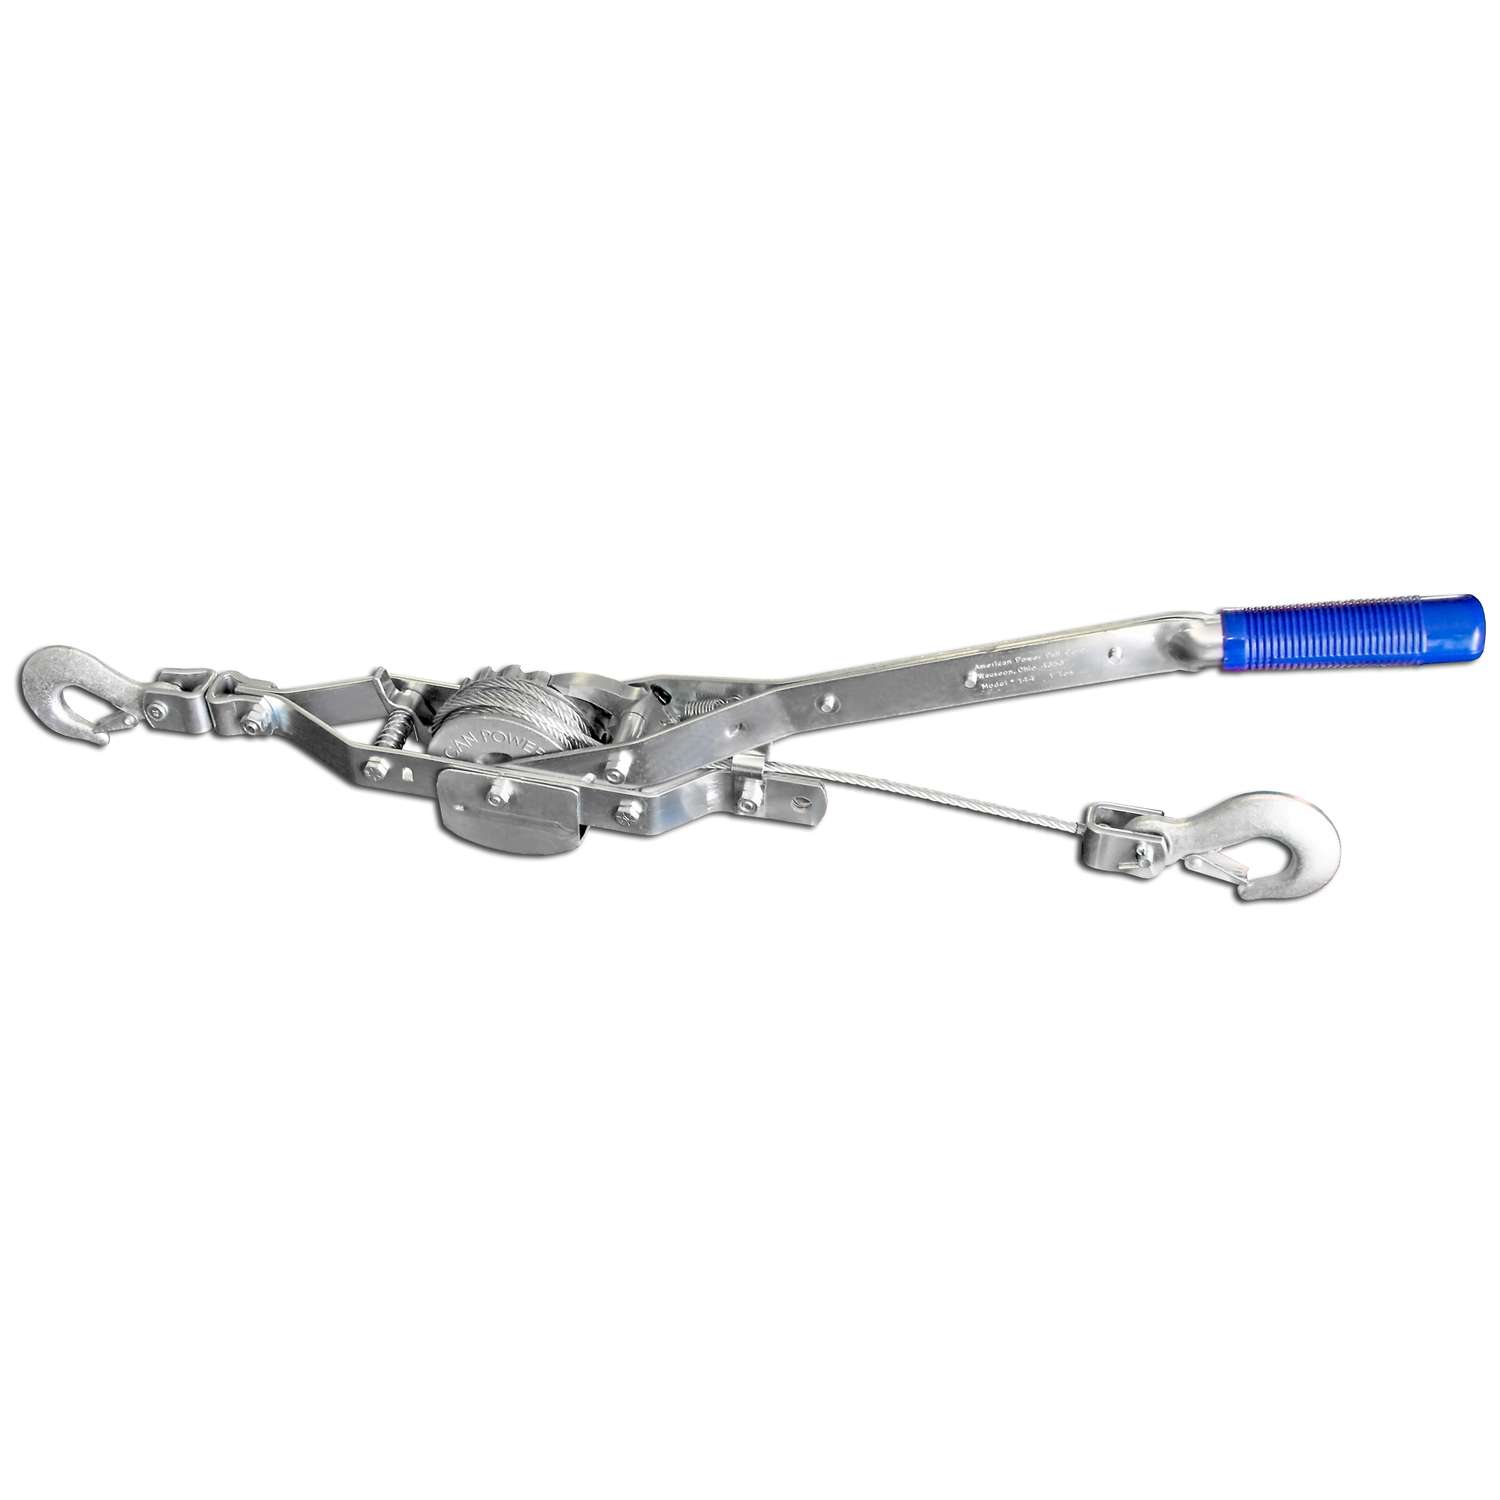 American Power Pull Heavy-Duty High-Quality Performance 3/4 Ton Rope Puller 